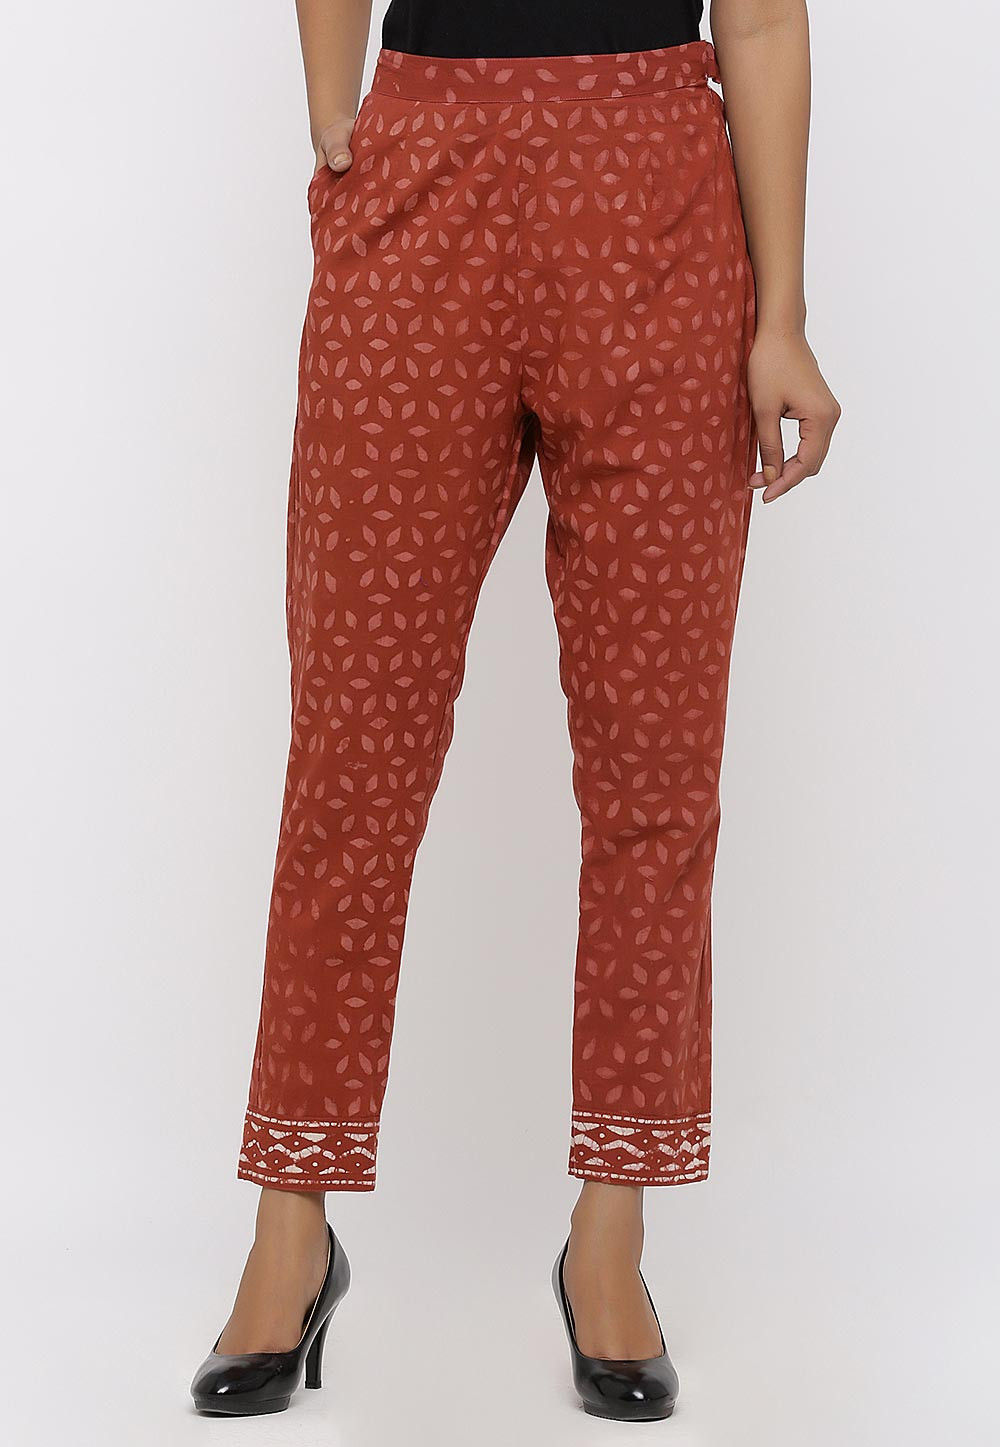 New Trending Printed Cotton Rayon Palazzo Pants for Women and Girls in Navy  Blue and Maroon Combo Pack